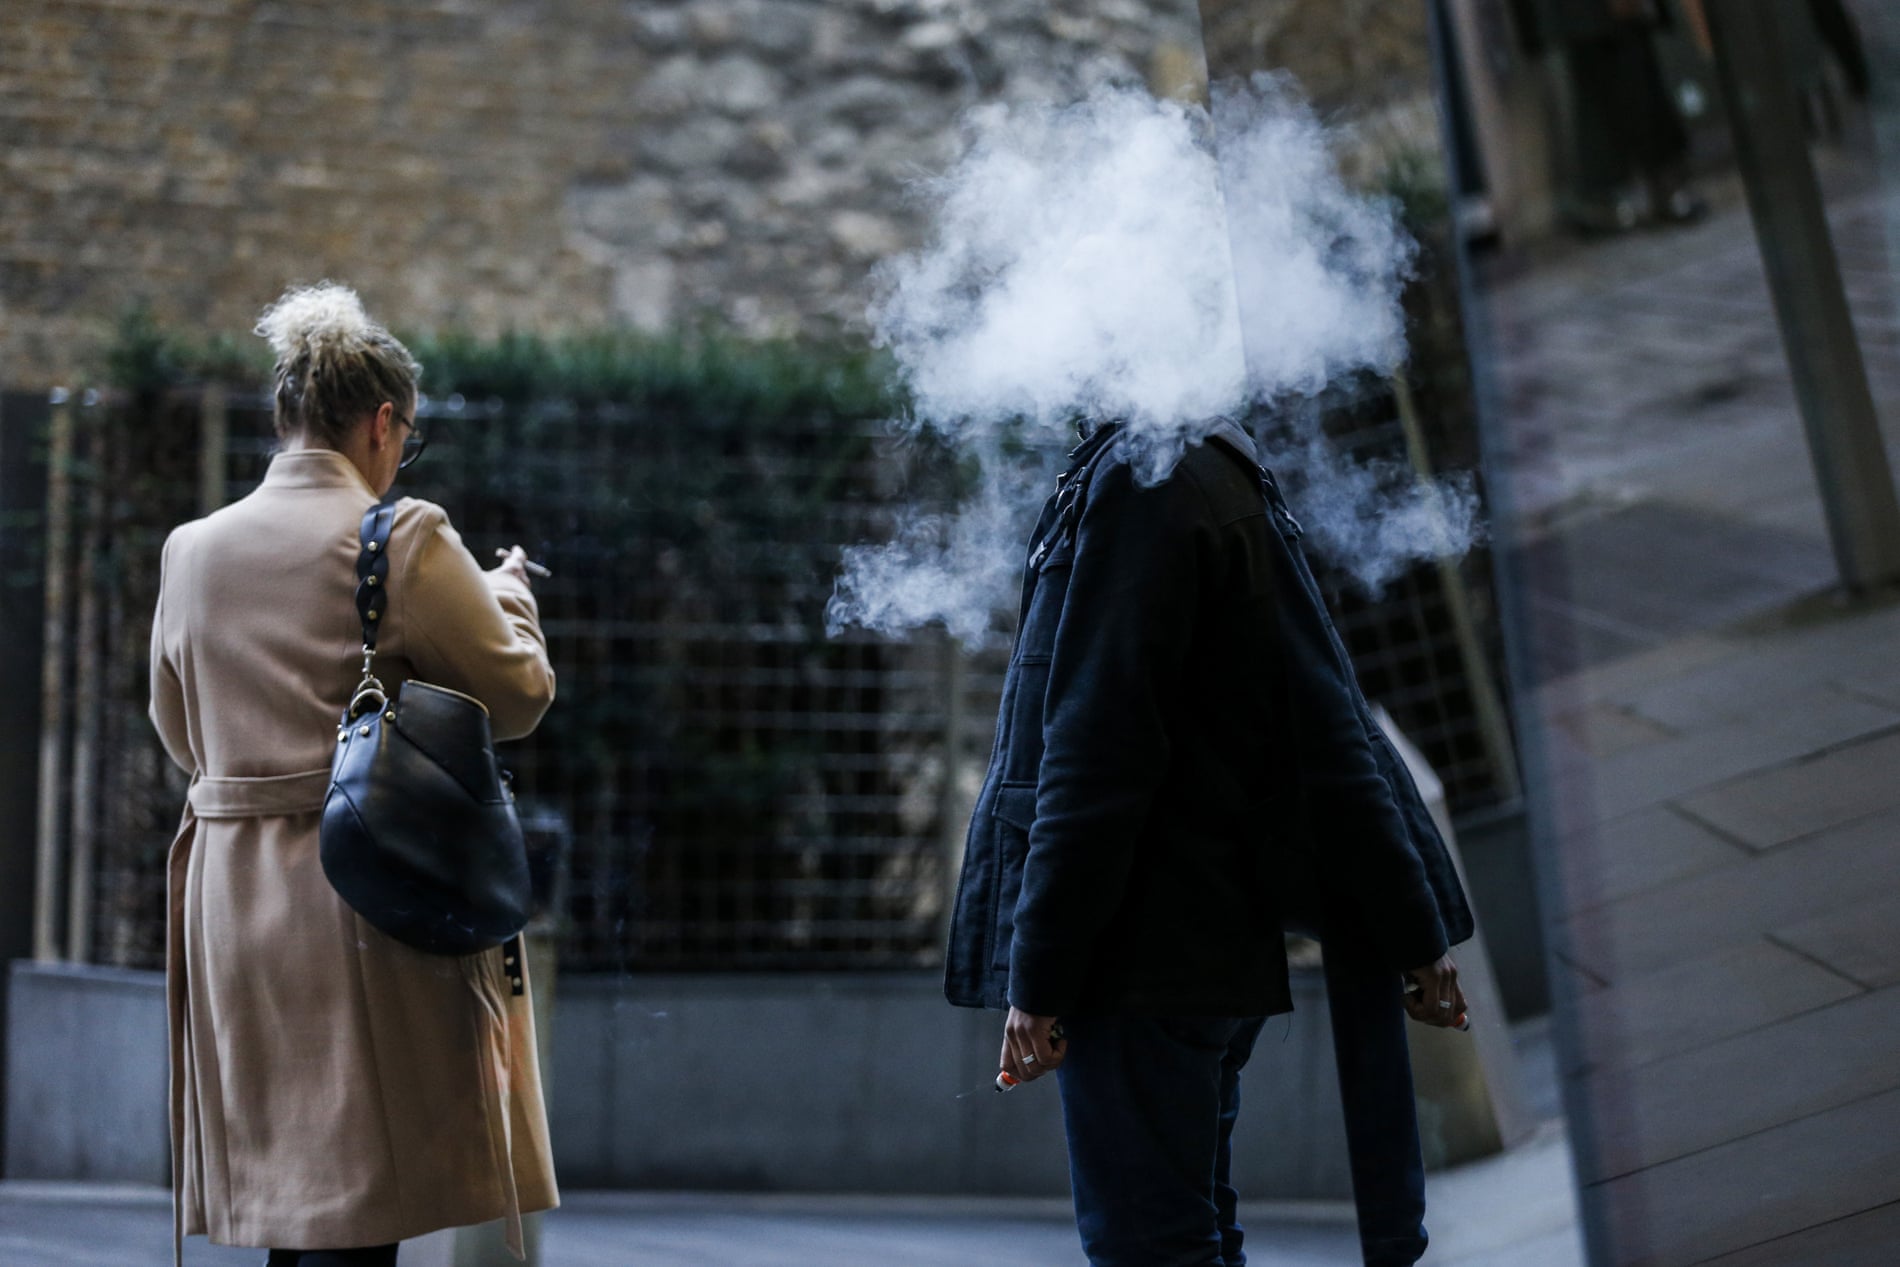 a smoker and a person vaping in london, uk